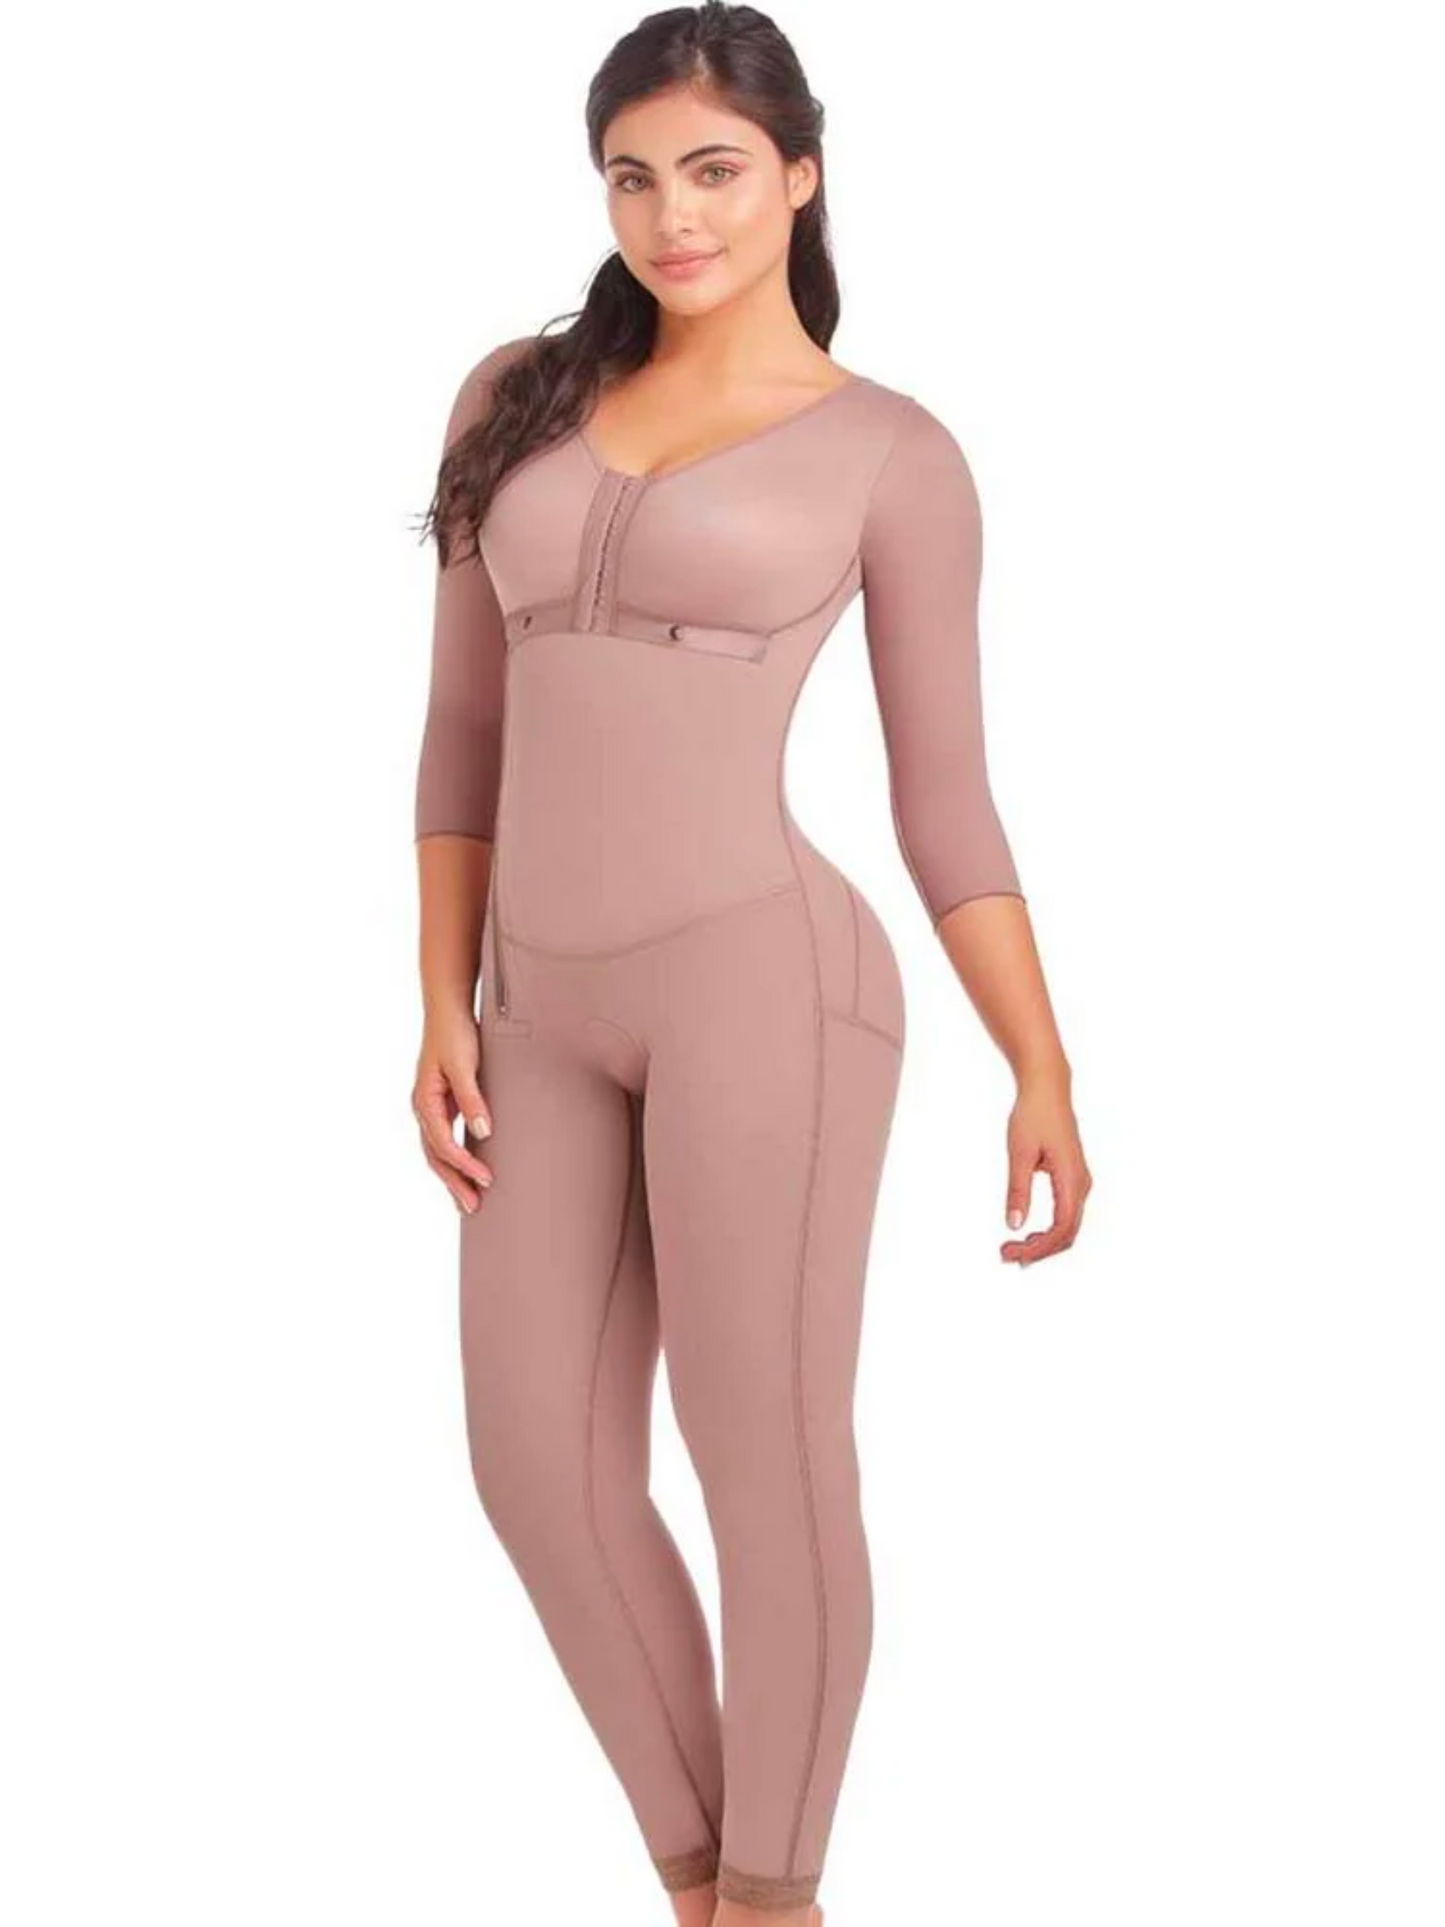 Long Sleeve Ankle-Length Size-Reducing & Post-Surgical Girdle  Ref 09036